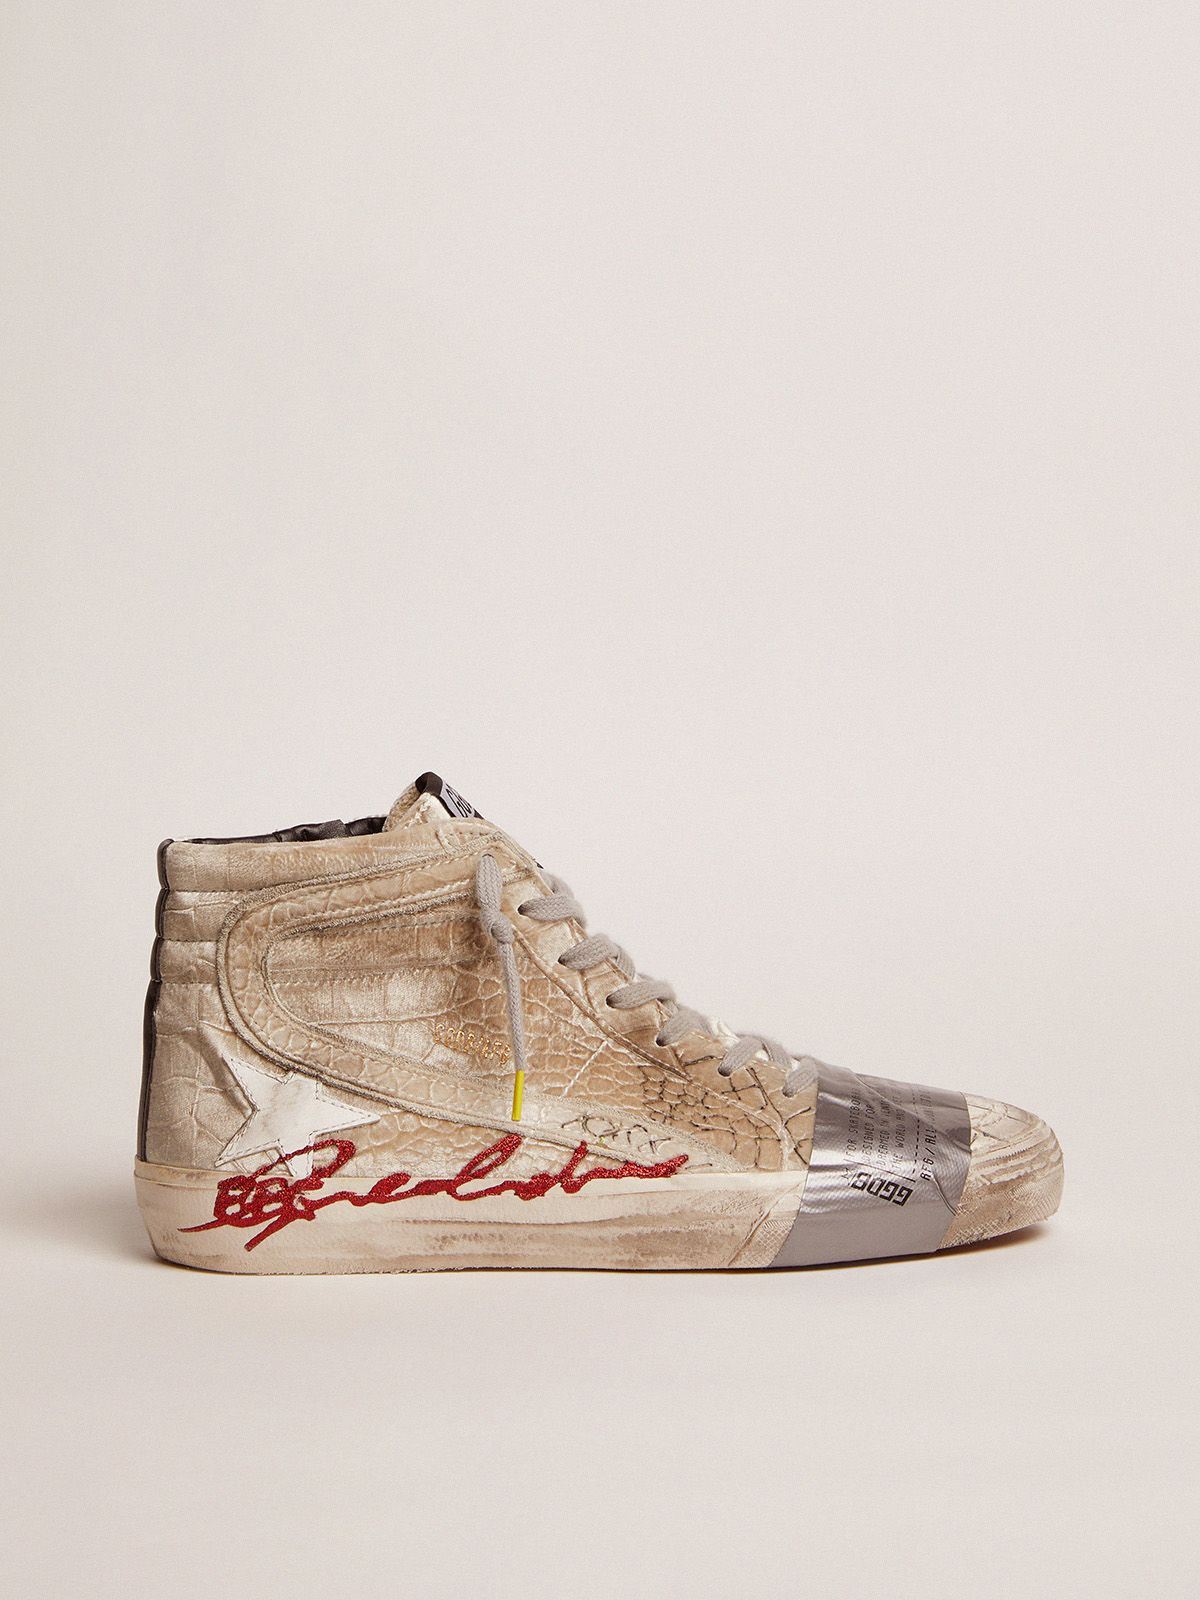 Golden Goose Donna Sneakers Slide LAB sneakers with silver velvet upper with crocodile print and appliquéd tape